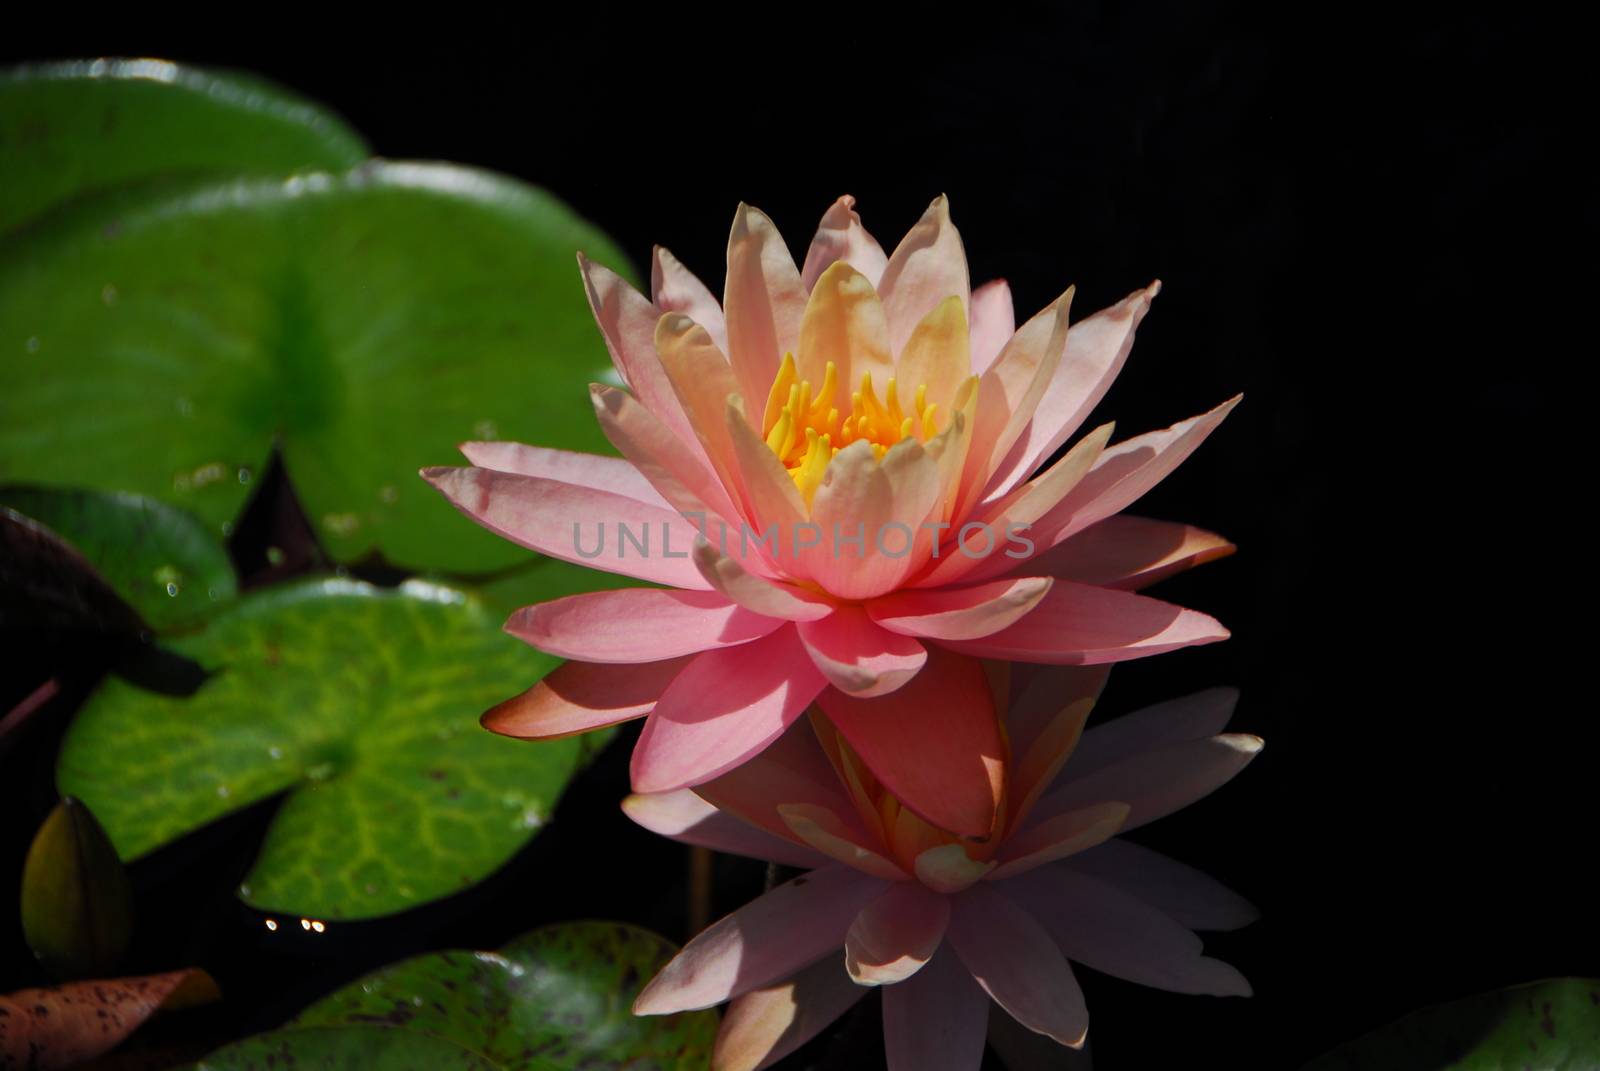 orange yellow water lily flower in bloom in pond